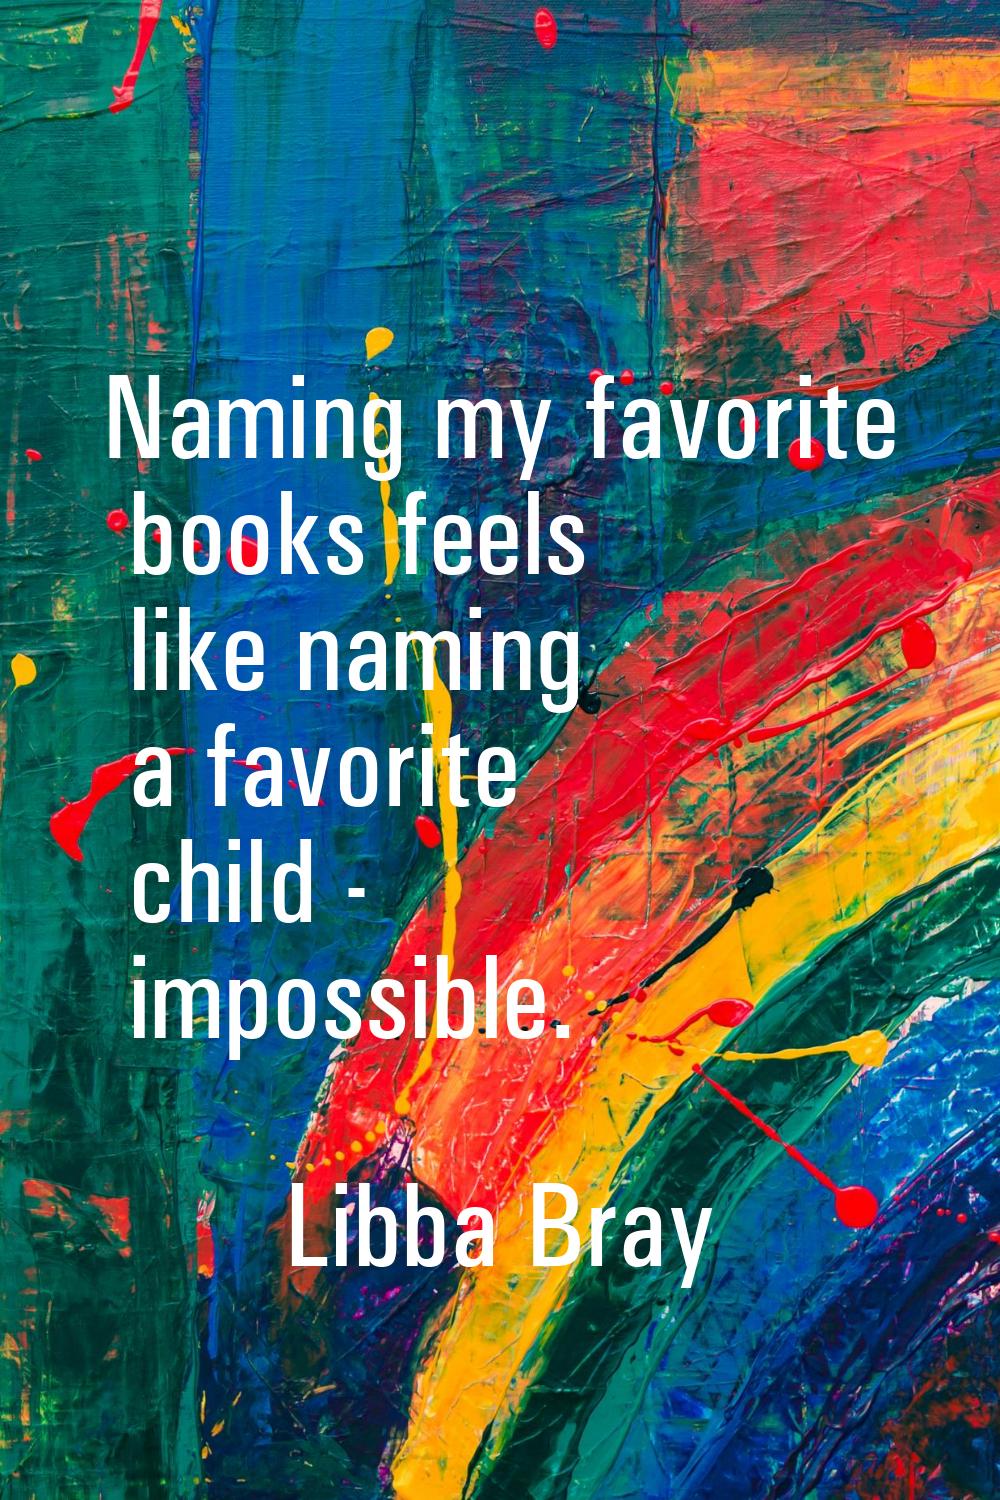 Naming my favorite books feels like naming a favorite child - impossible.